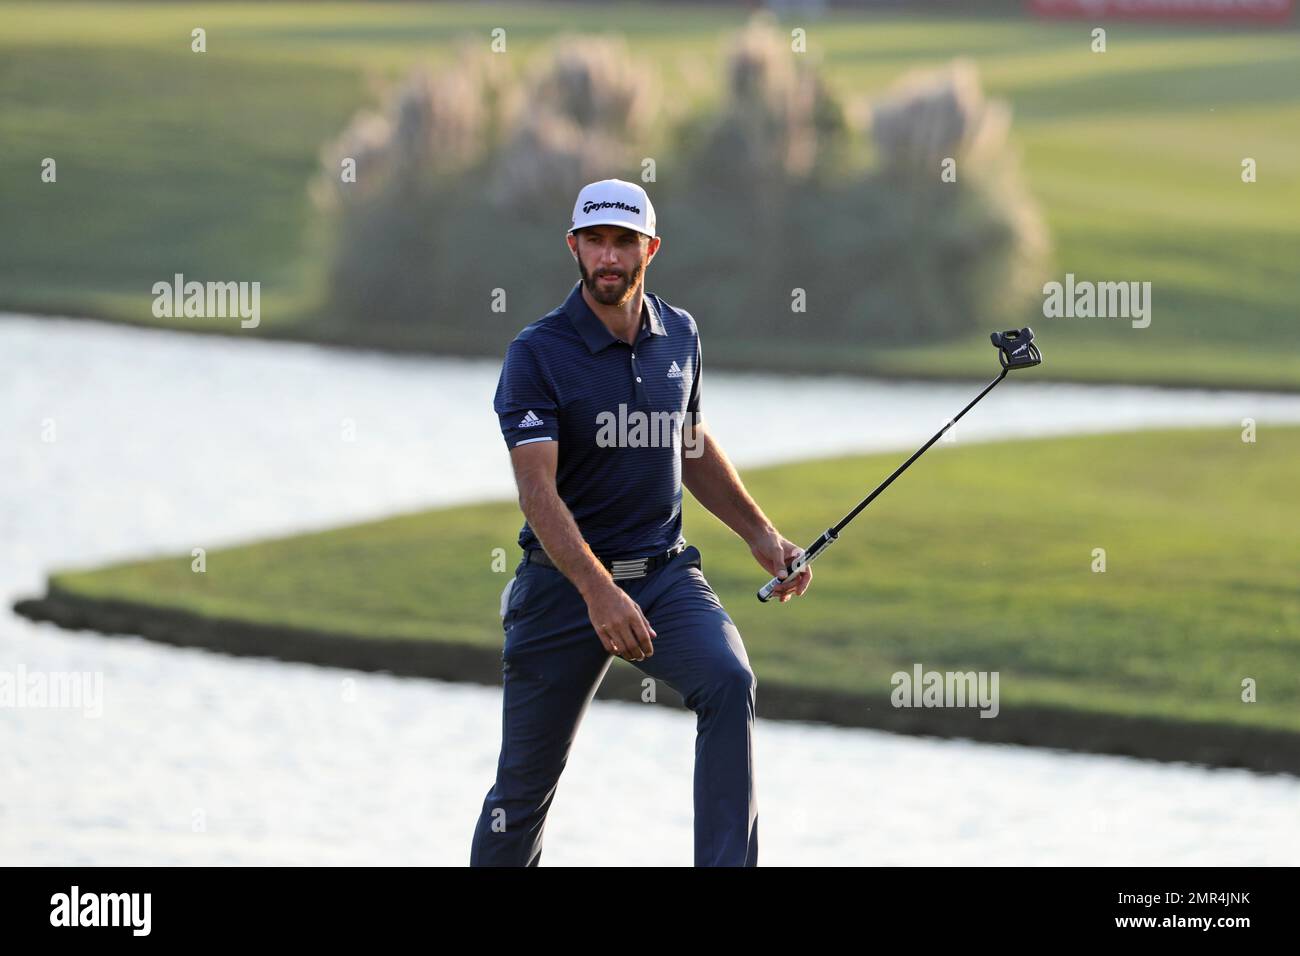 World number one golfer Dustin Johnson looks for his shot at the 18th hole  in round three of the 2017 WGC-HSBC Champions golf tournament held at the Sheshan  International Golf Club in